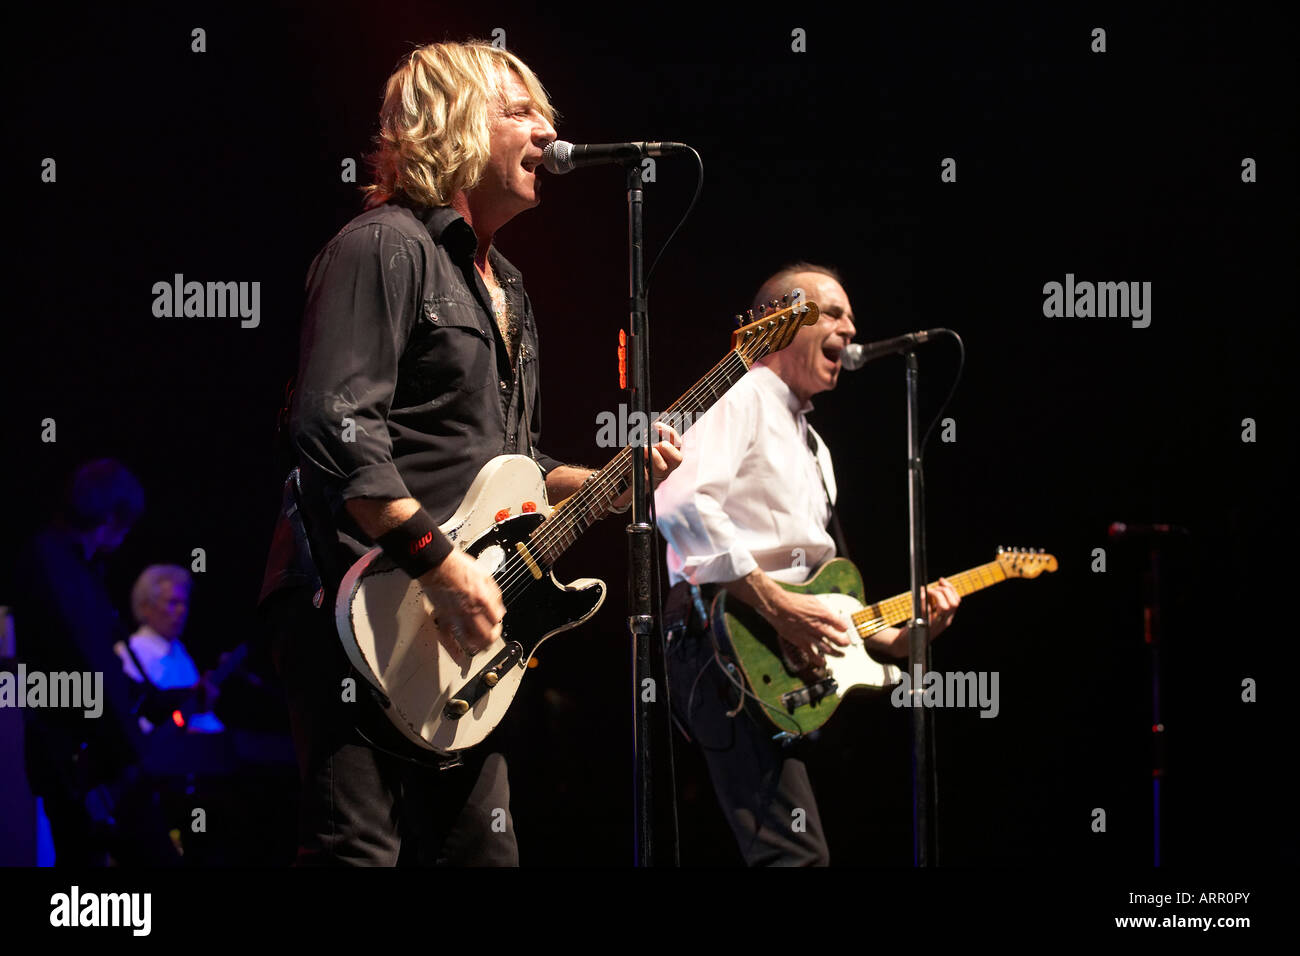 Rick Parfitt and Francis Rossi of rock band Status Quo play guitar riffs during gig on European tour in Lille France Stock Photo